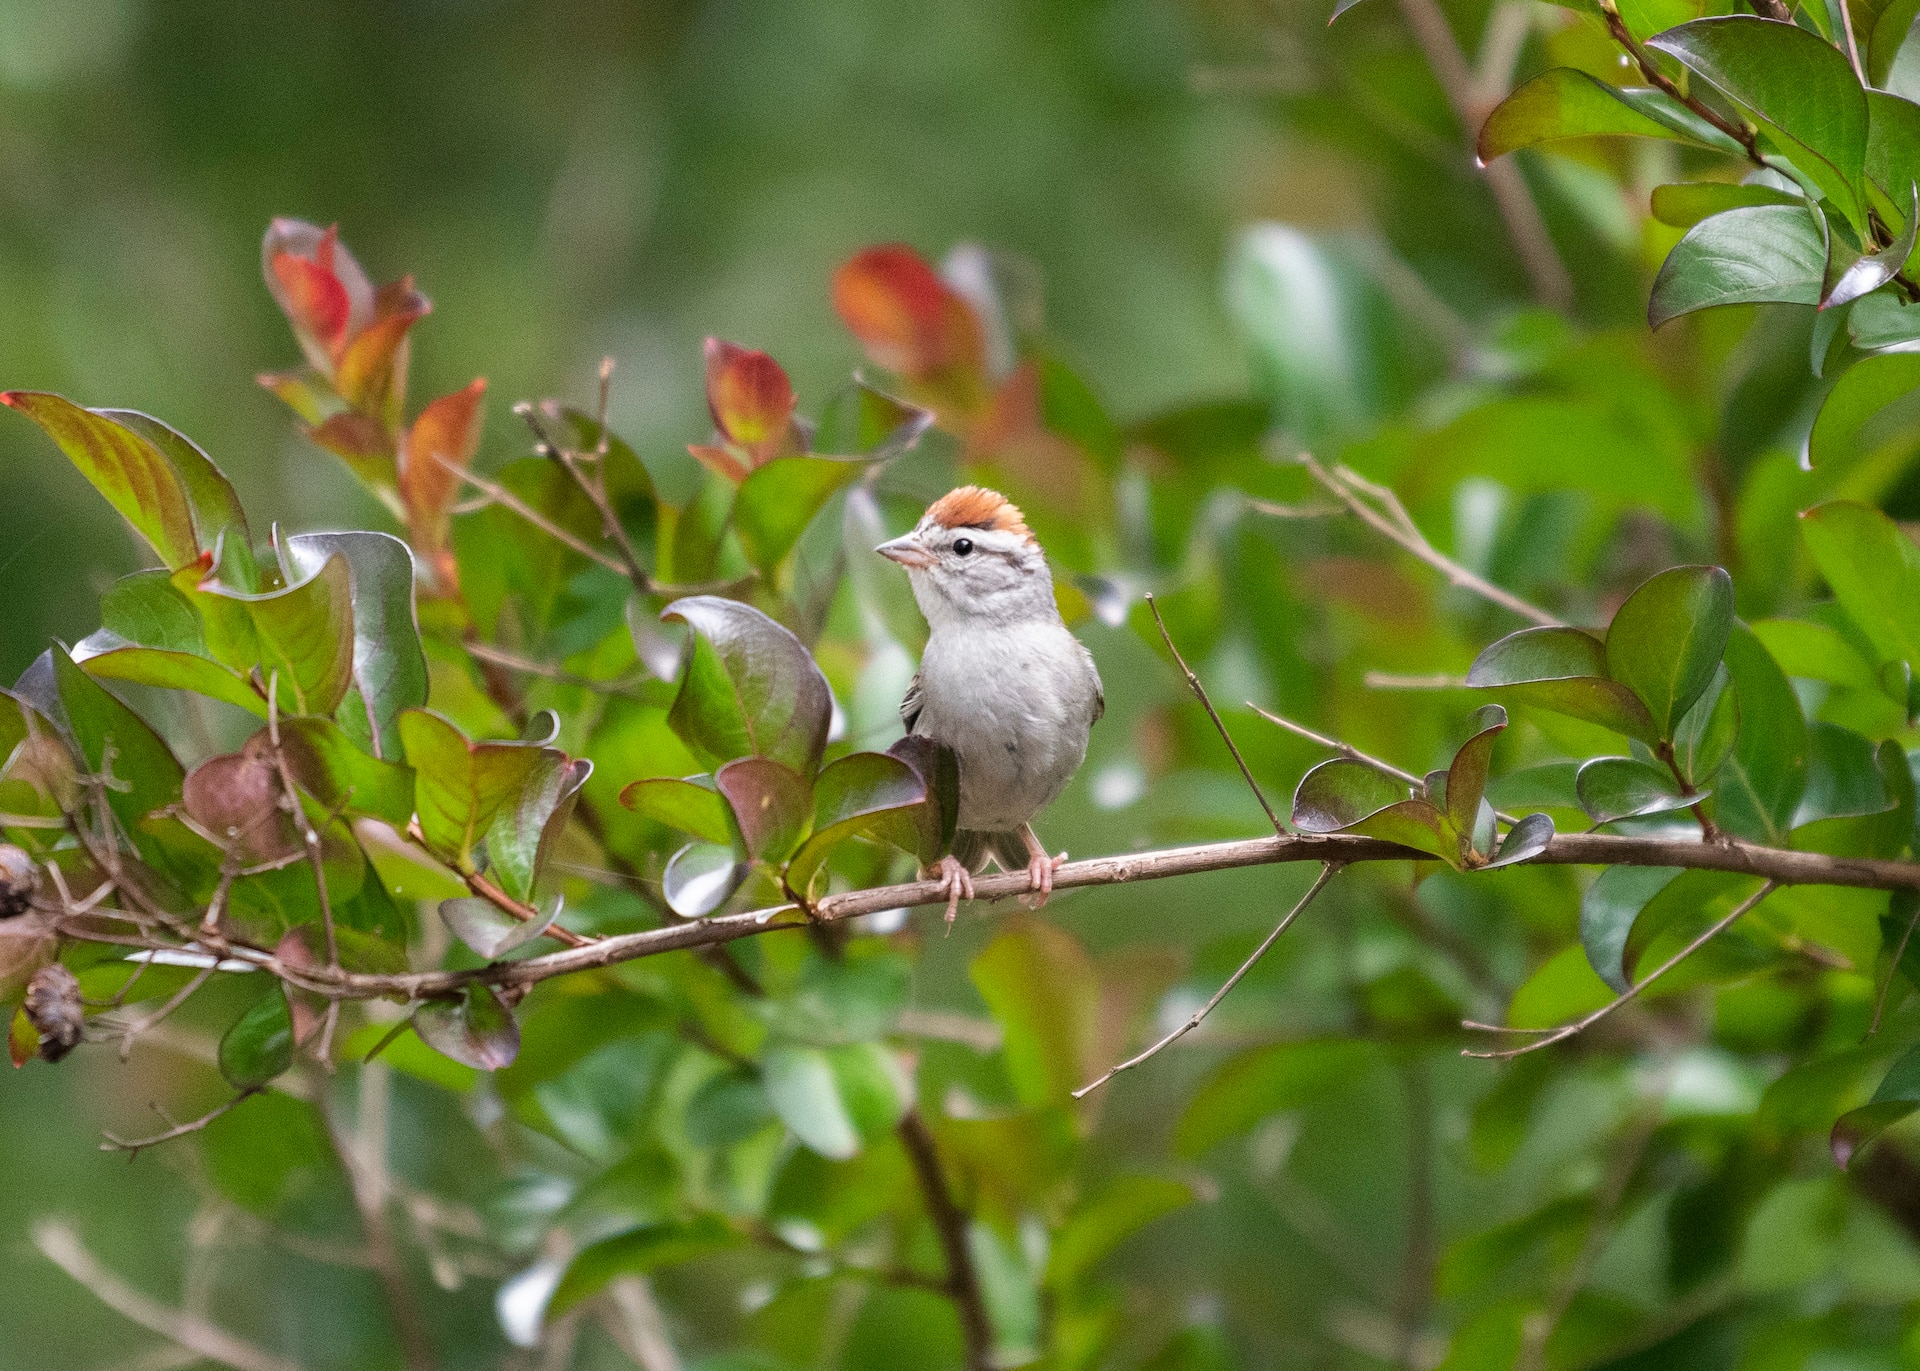 Photograph of a bird perched on a tree branch taken using an f / 2.8 aperture.